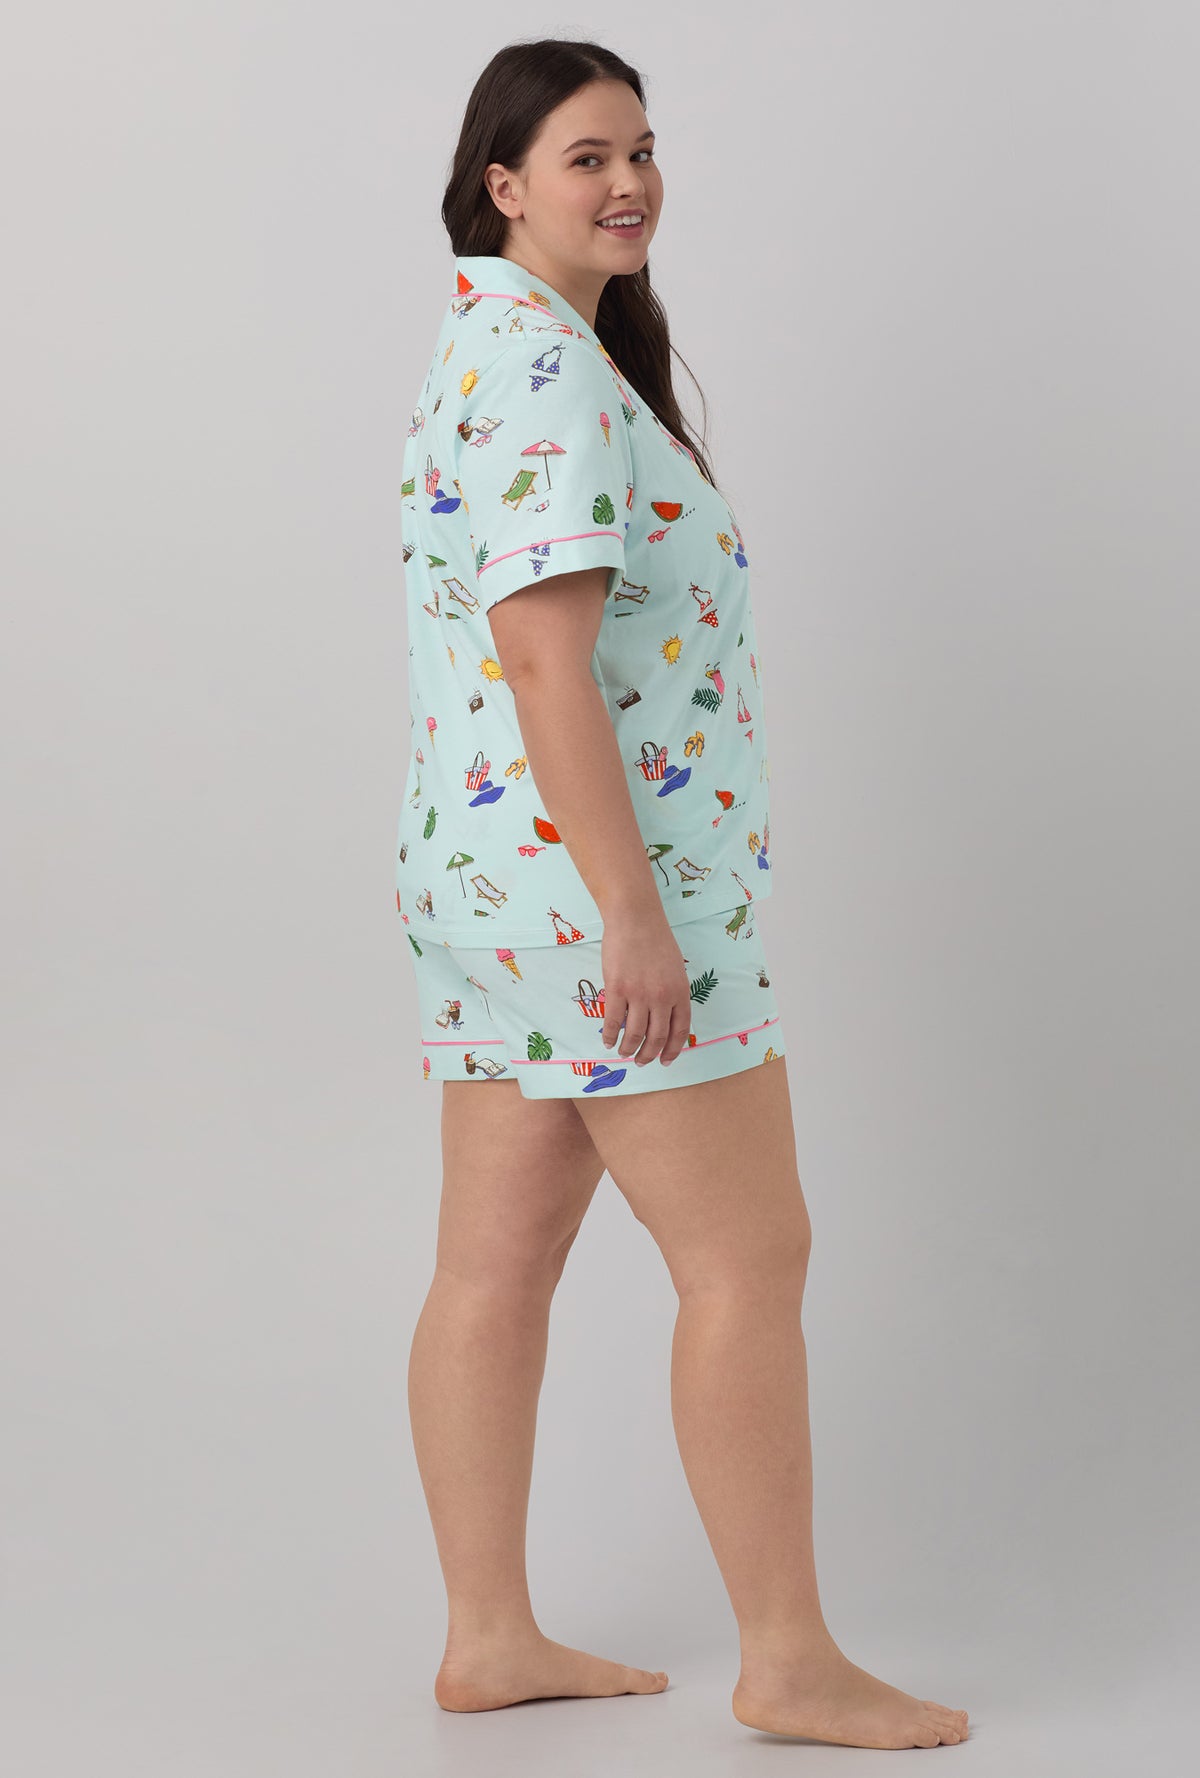 A lady wearing blue short sleeve classic shorty stretch jersey plus size pj set with beach day print